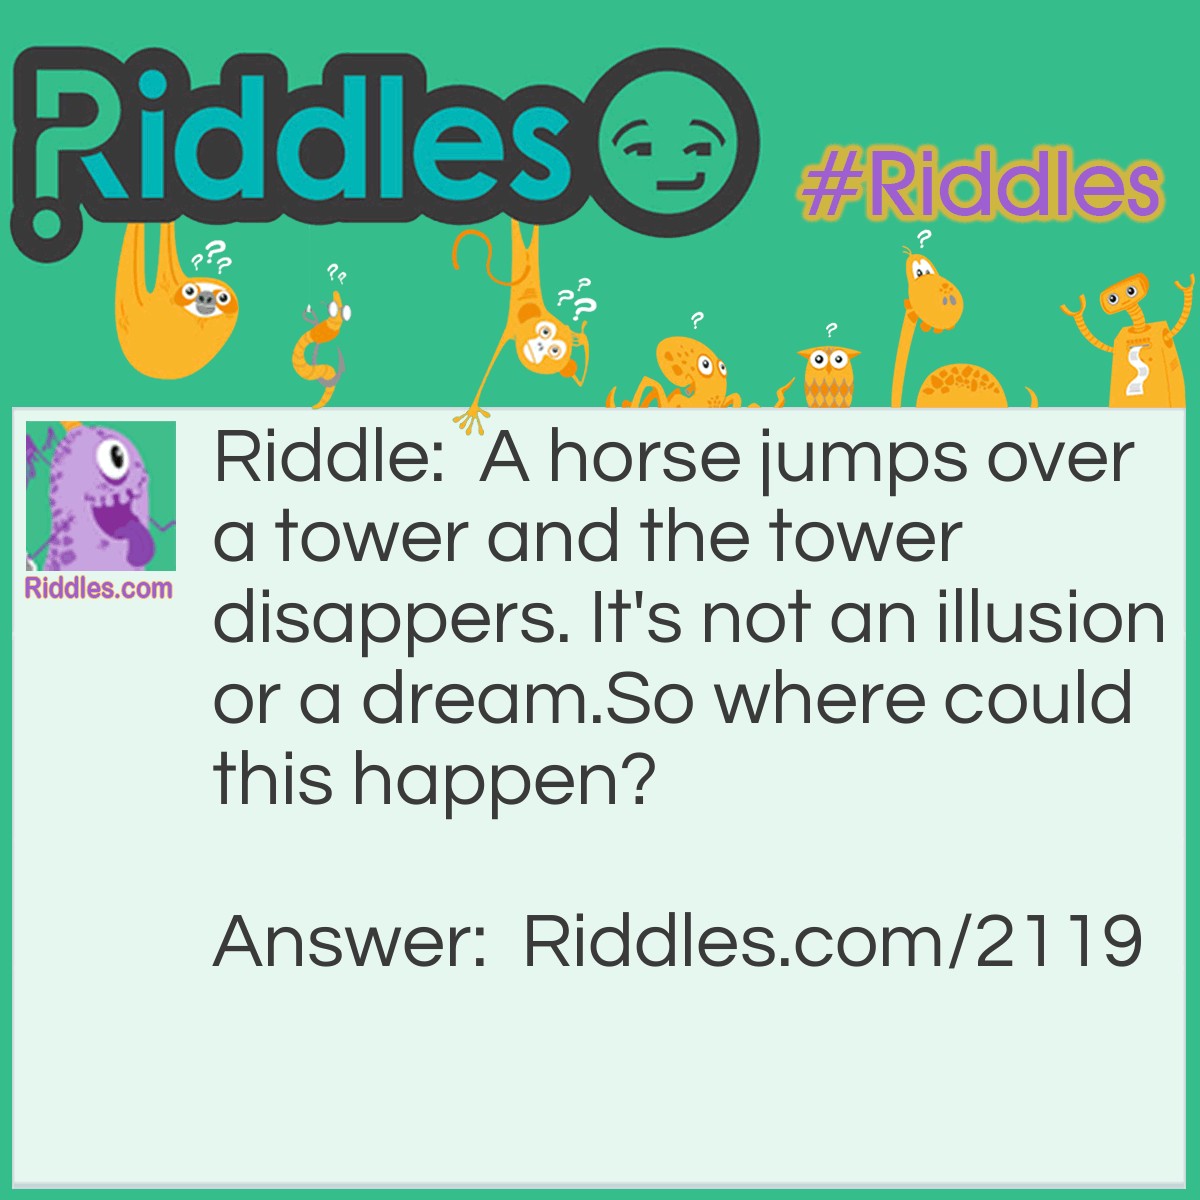 Riddle: A horse jumps over a tower and the tower disappers. It's not an illusion or a dream.
So where could this happen? Answer: On a chessboard.